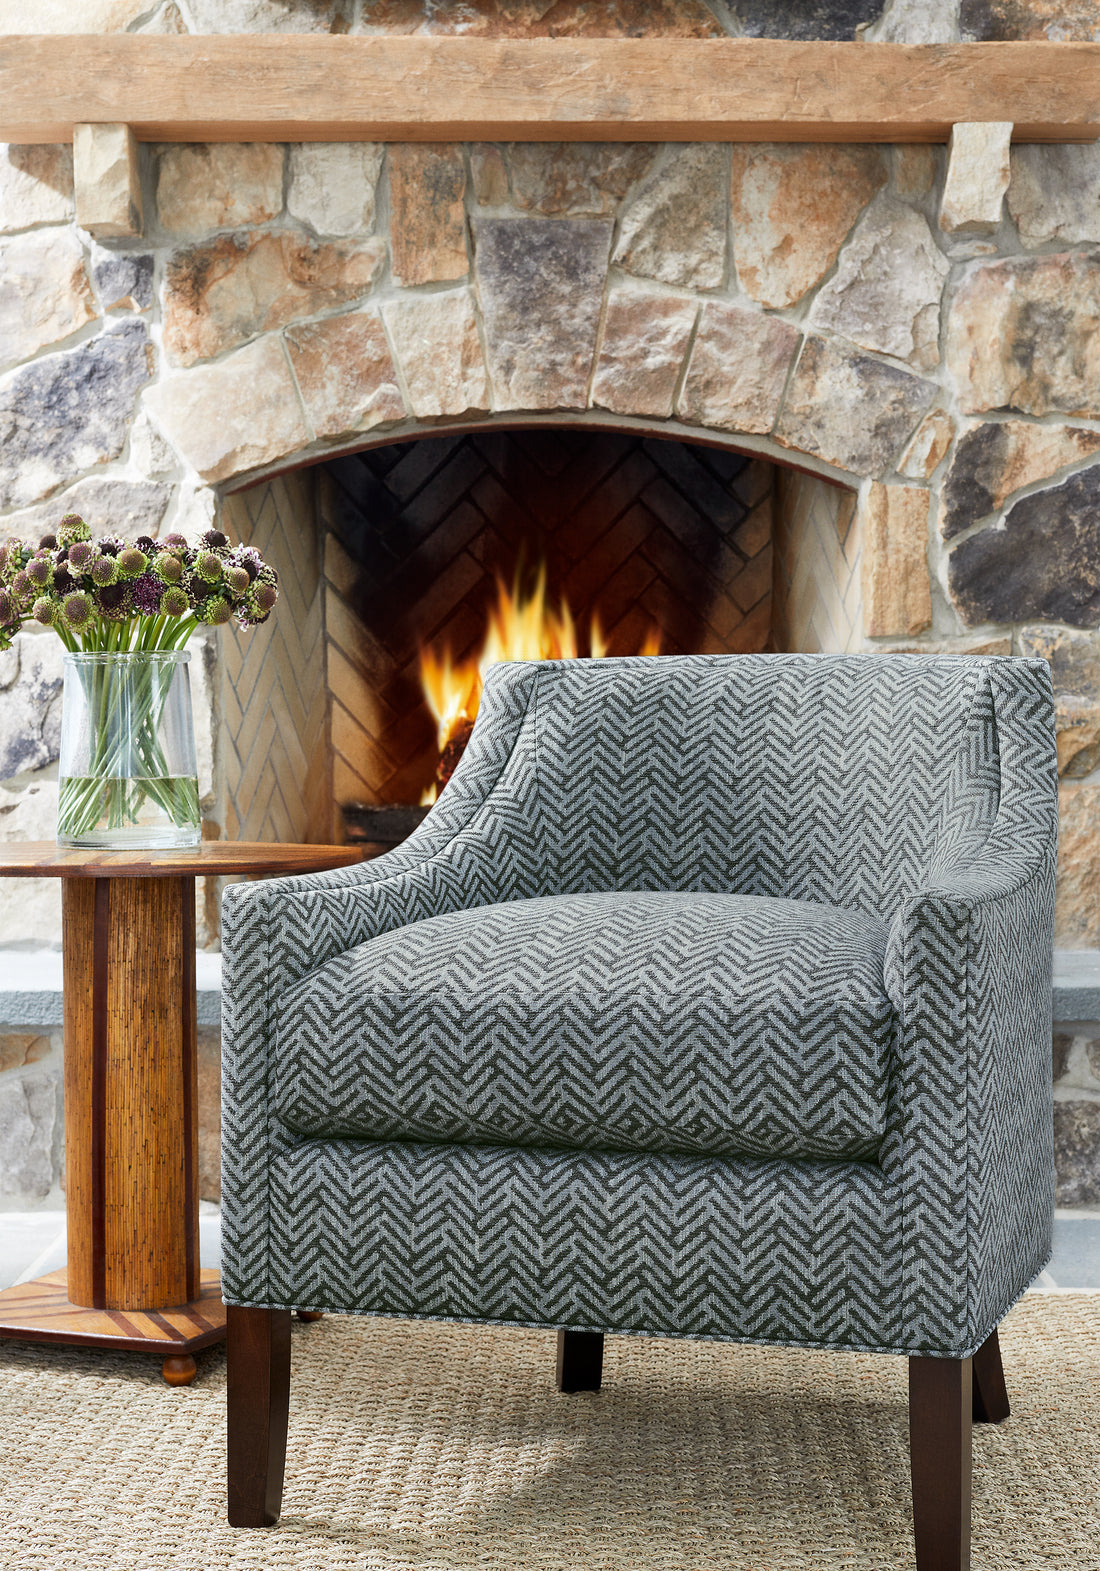 Everett Chair in Varenna woven fabric in mineral color - pattern number W8113 - by Thibaut in the Sereno collection